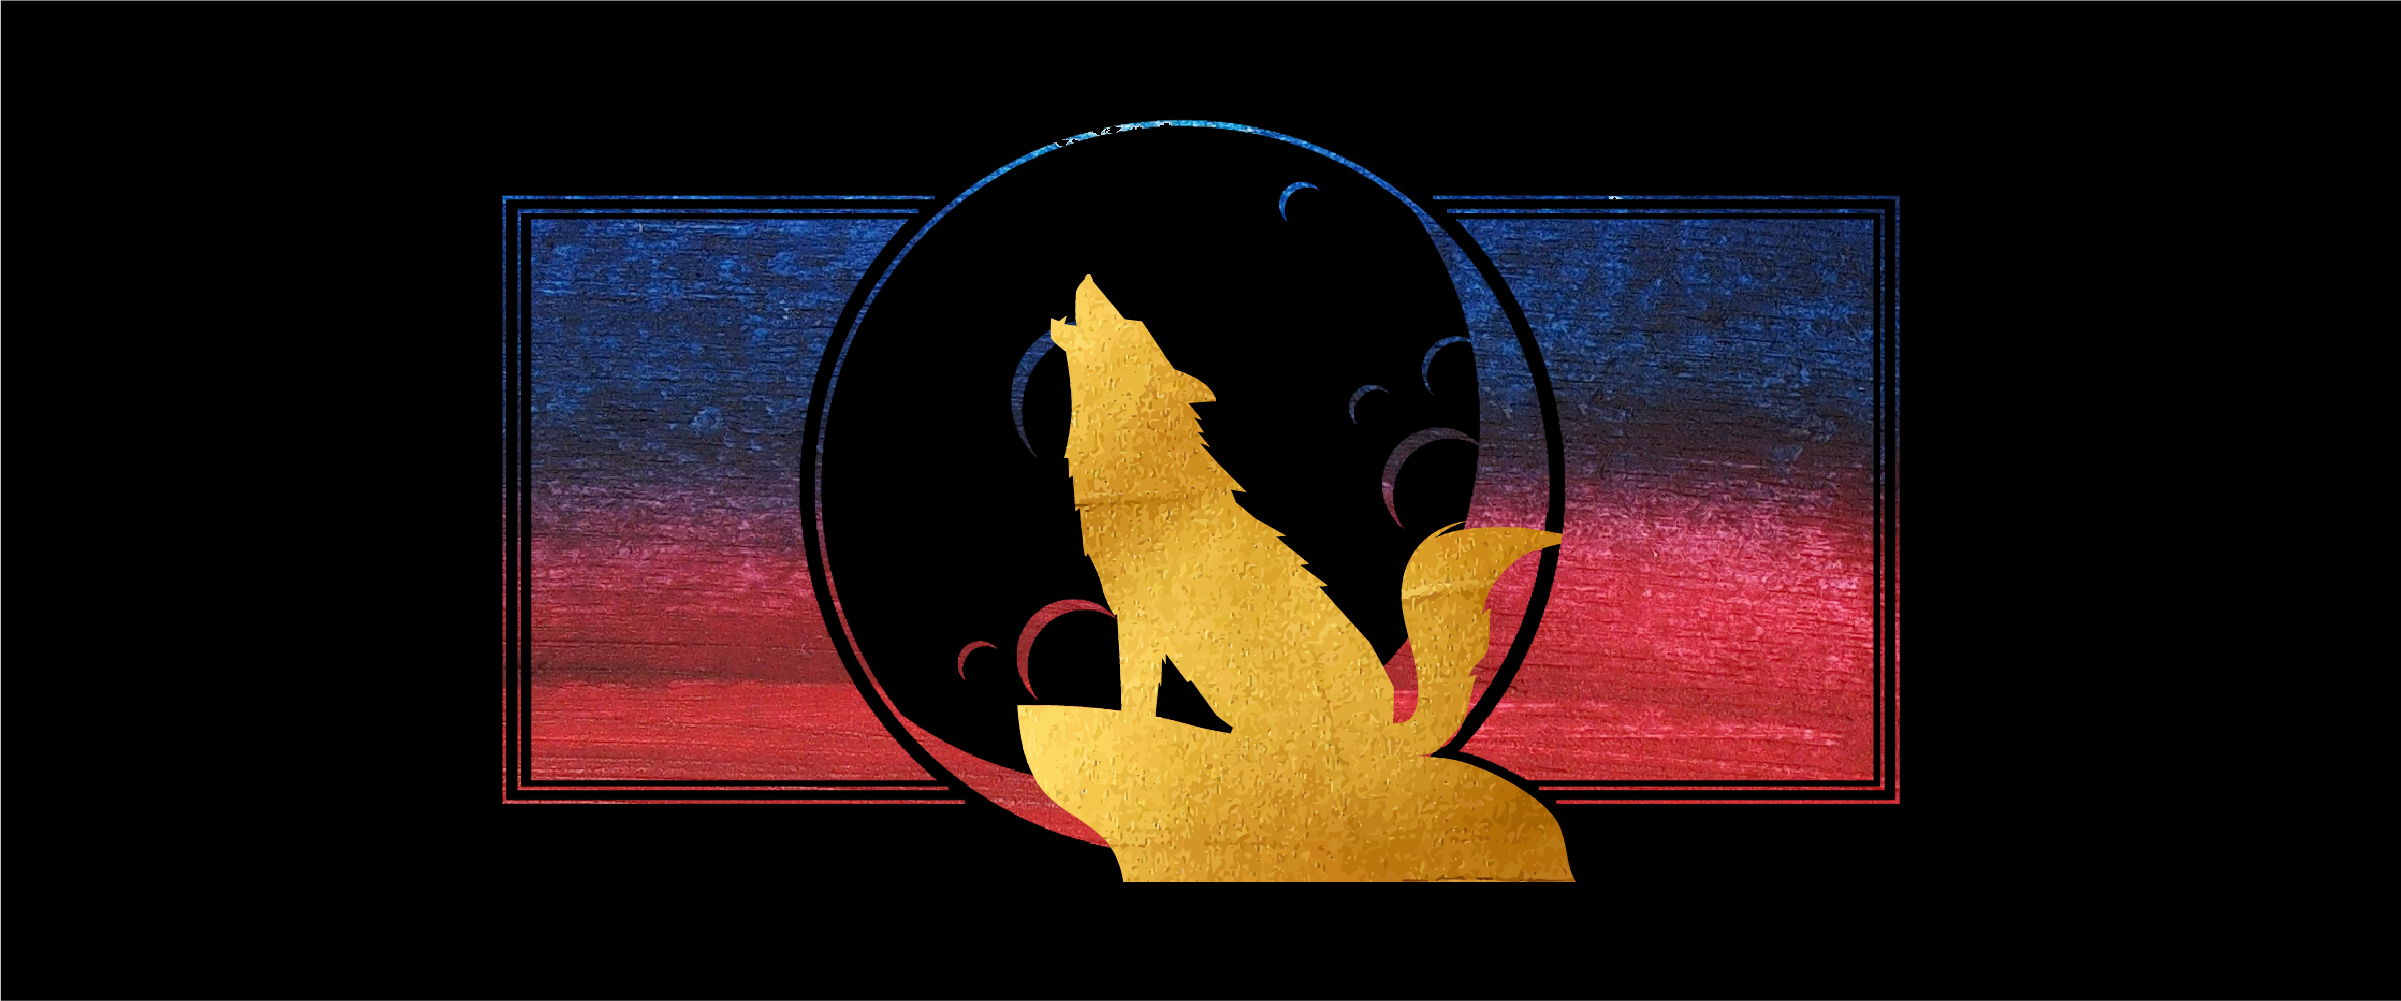 An image of a howling wolf with blue and red gradient colors inside a black rectangle.